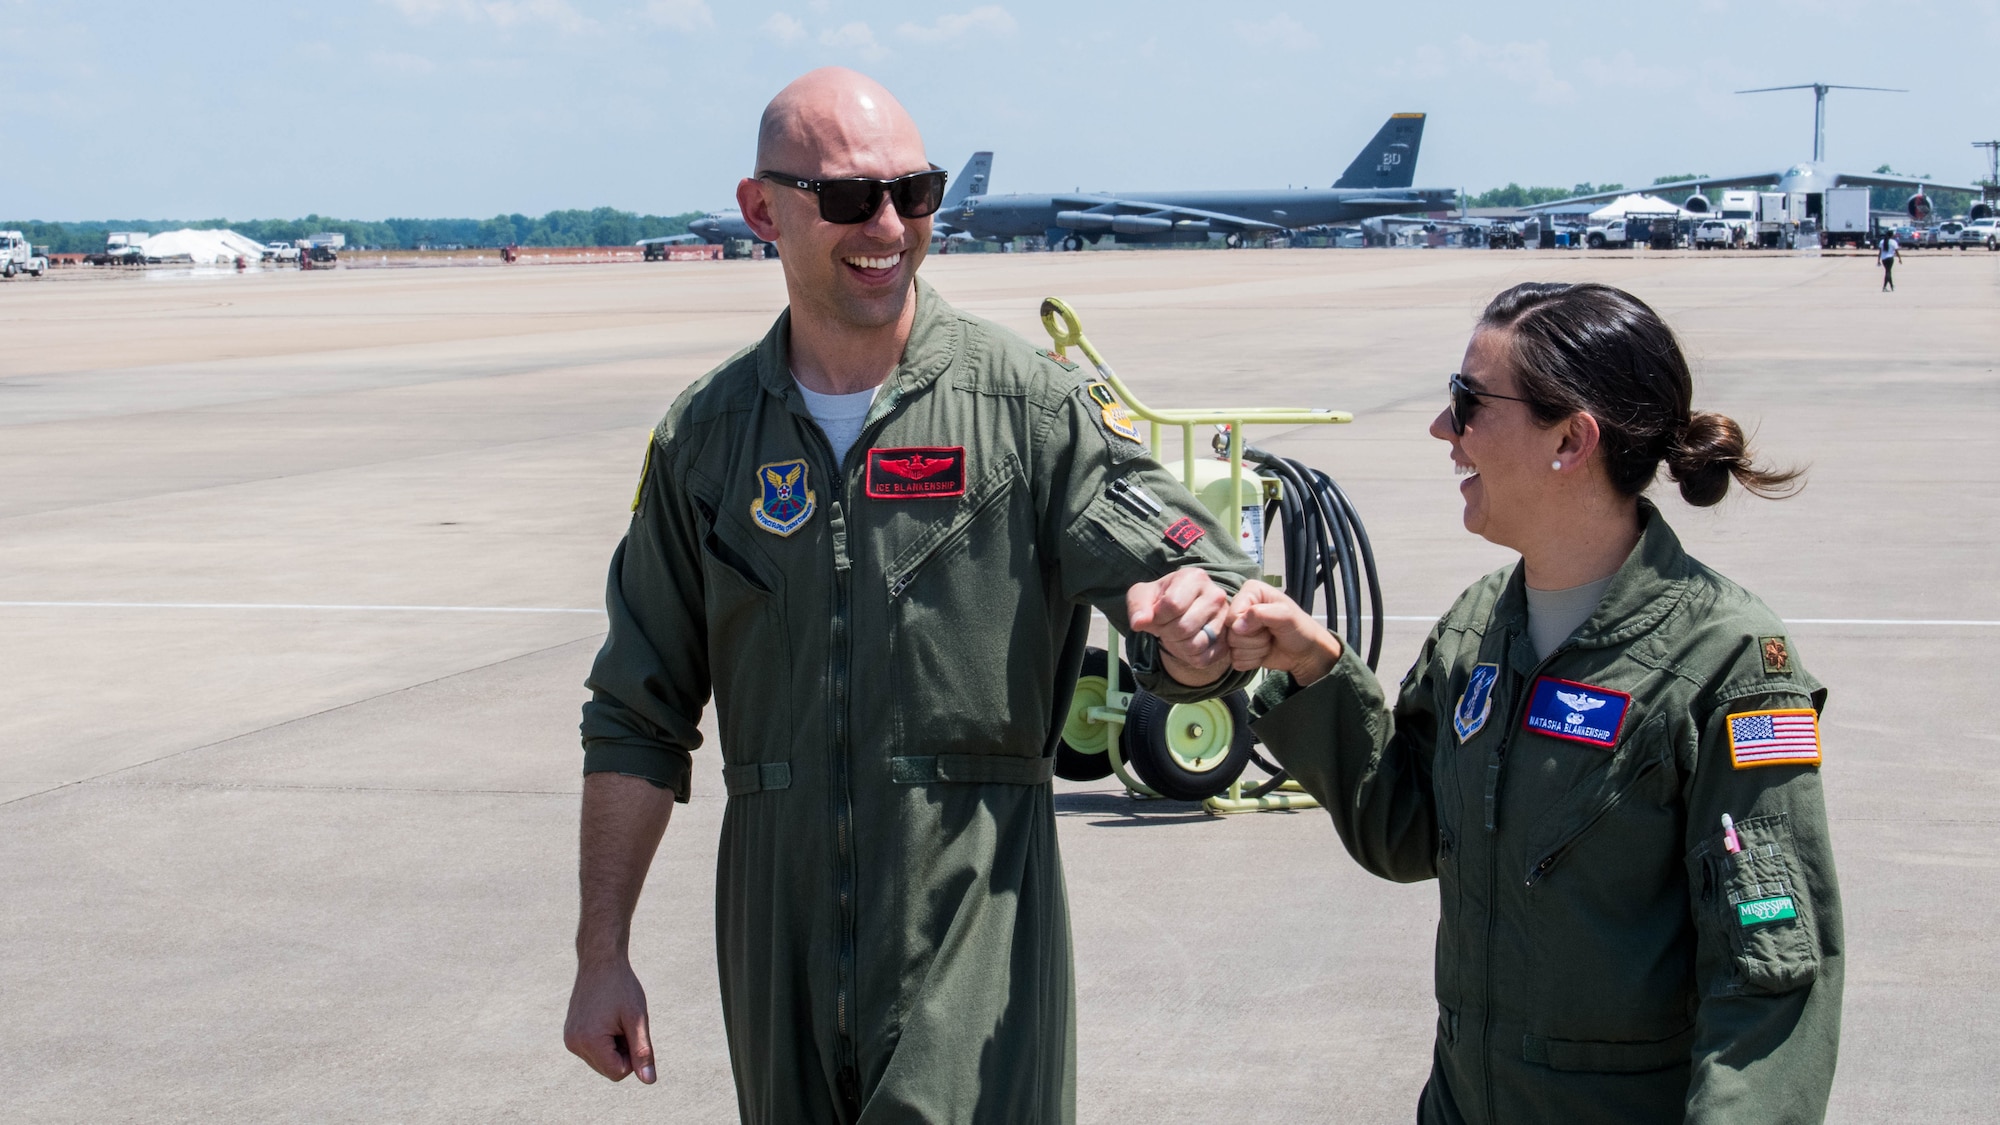 Maj. John R. Blankenship, a B-52 Stratofortress pilot with the 96th Bomb Squadron, and his wife Maj. Natasha E. Blankenship, a C-17 Globemaster III pilot with the 183rd Airlift Squadron in Jackson, Mississippi, gives each other a fist bump after Natasha Blankenship landed her aircraft to be put on display as apart of the Barksdale Defenders of Liberty Air Show at Barksdale Air Force Base, La., May 16, 2019. The Blankenships have a combined 10 deployments under their belts. (U.S. Air Force photo by Airman Jacob B. Wrightsman)